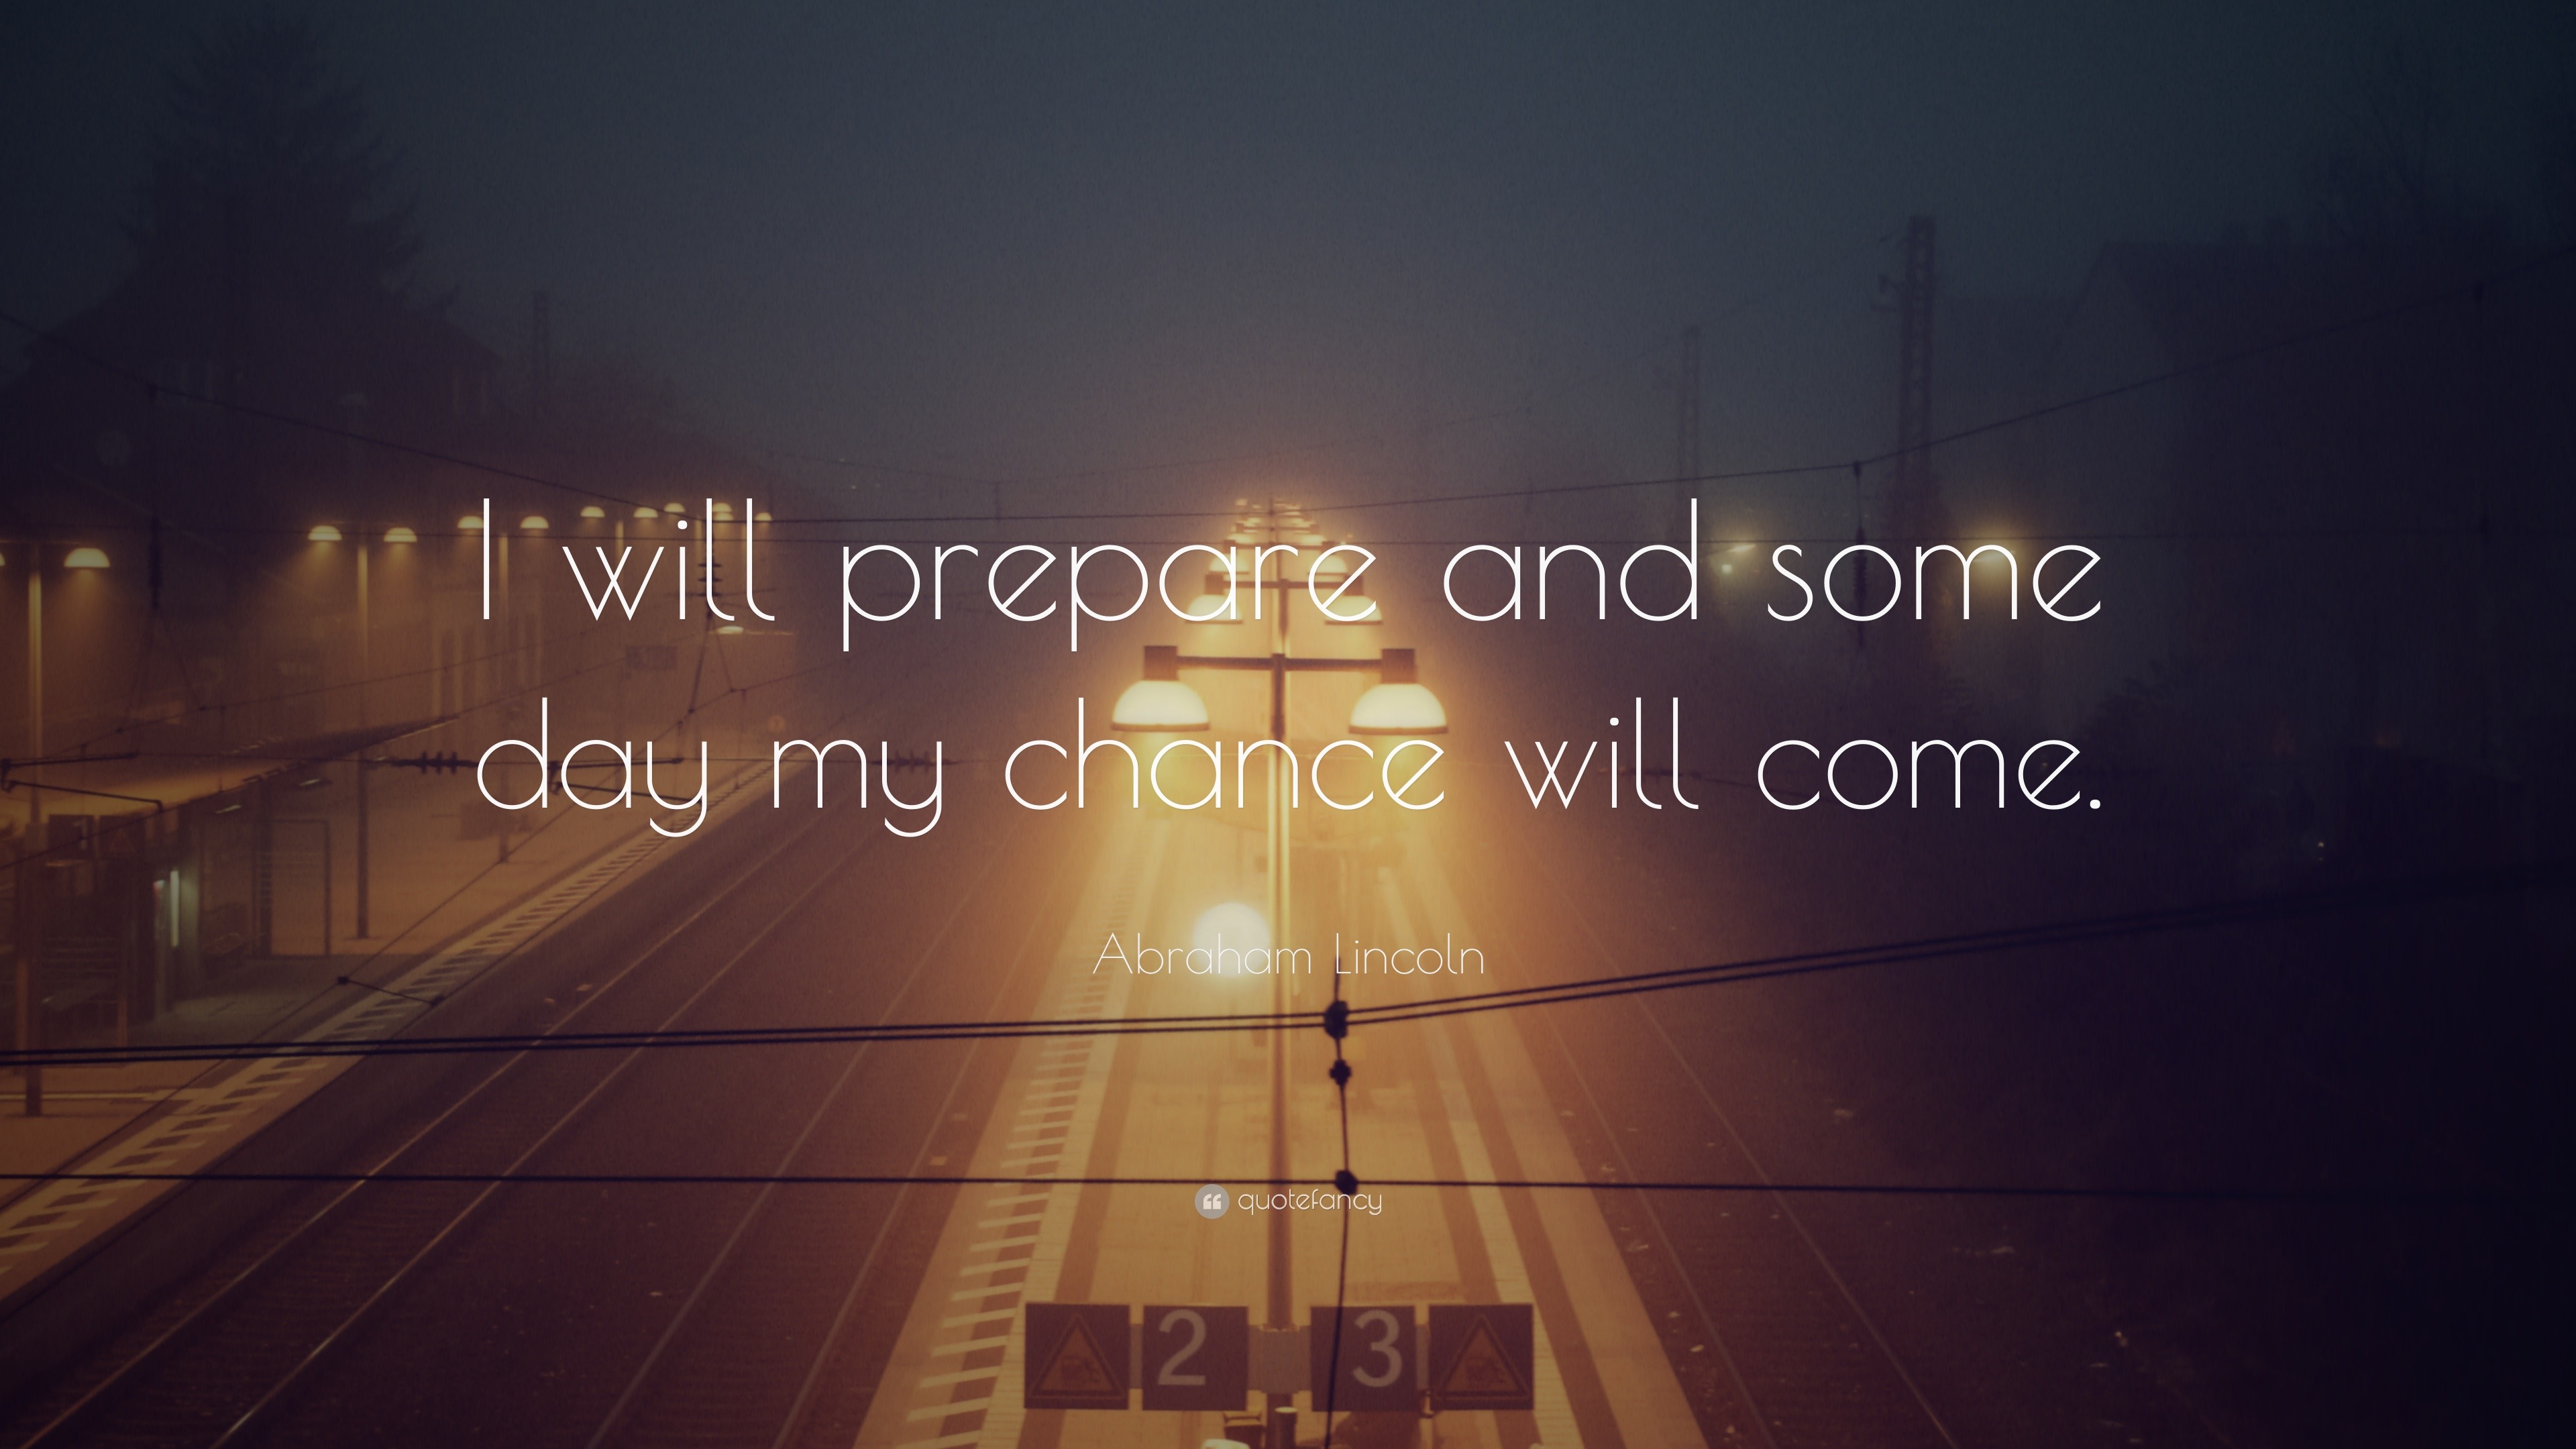 Abraham Lincoln Quote: “I will prepare and some day my chance will come.” (24 ...